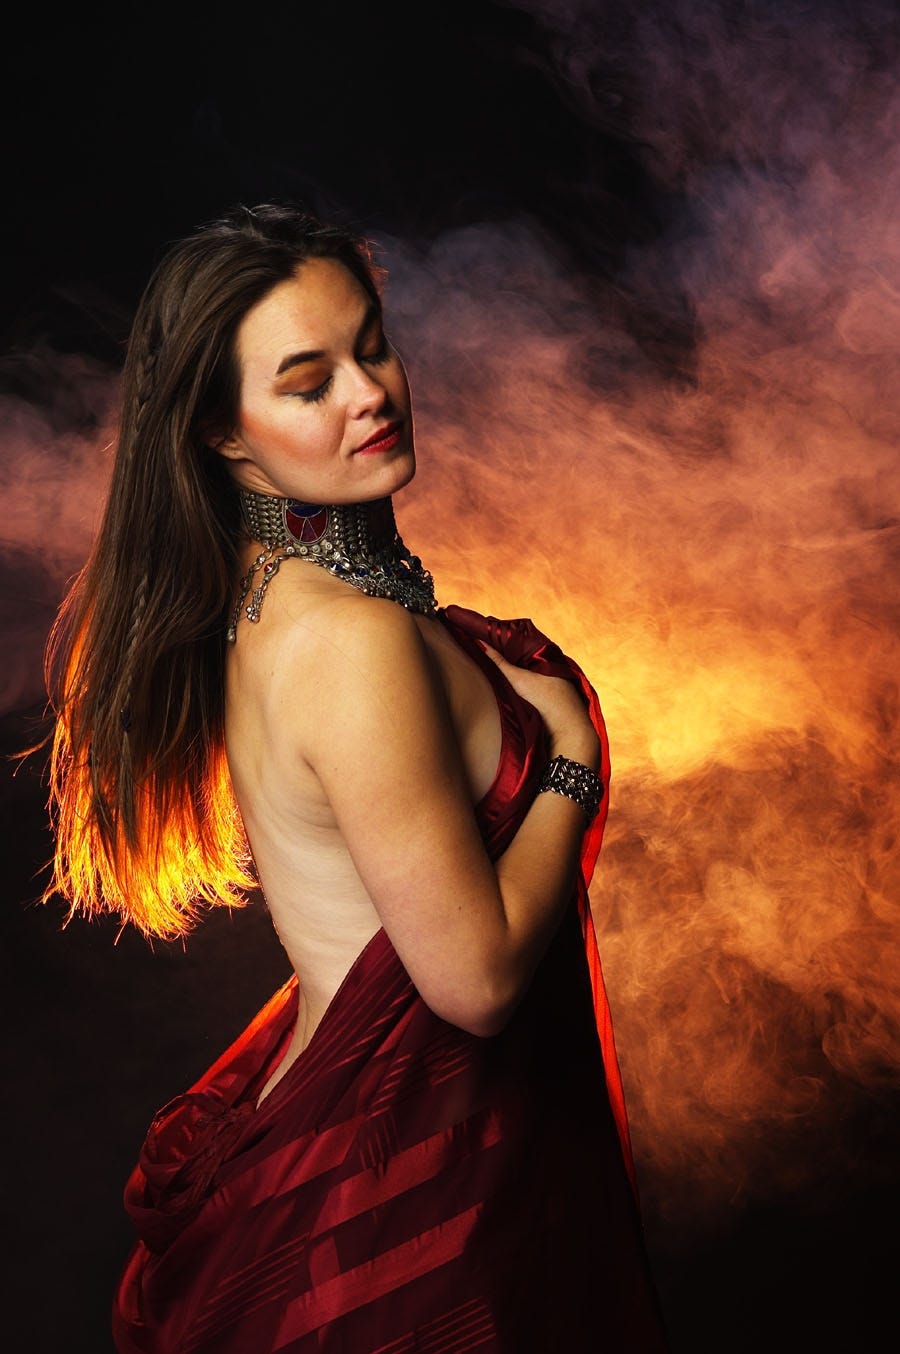 The author, eyes closed amidst glowing, fiery smoke, draped in a veil and an ornate metal choker